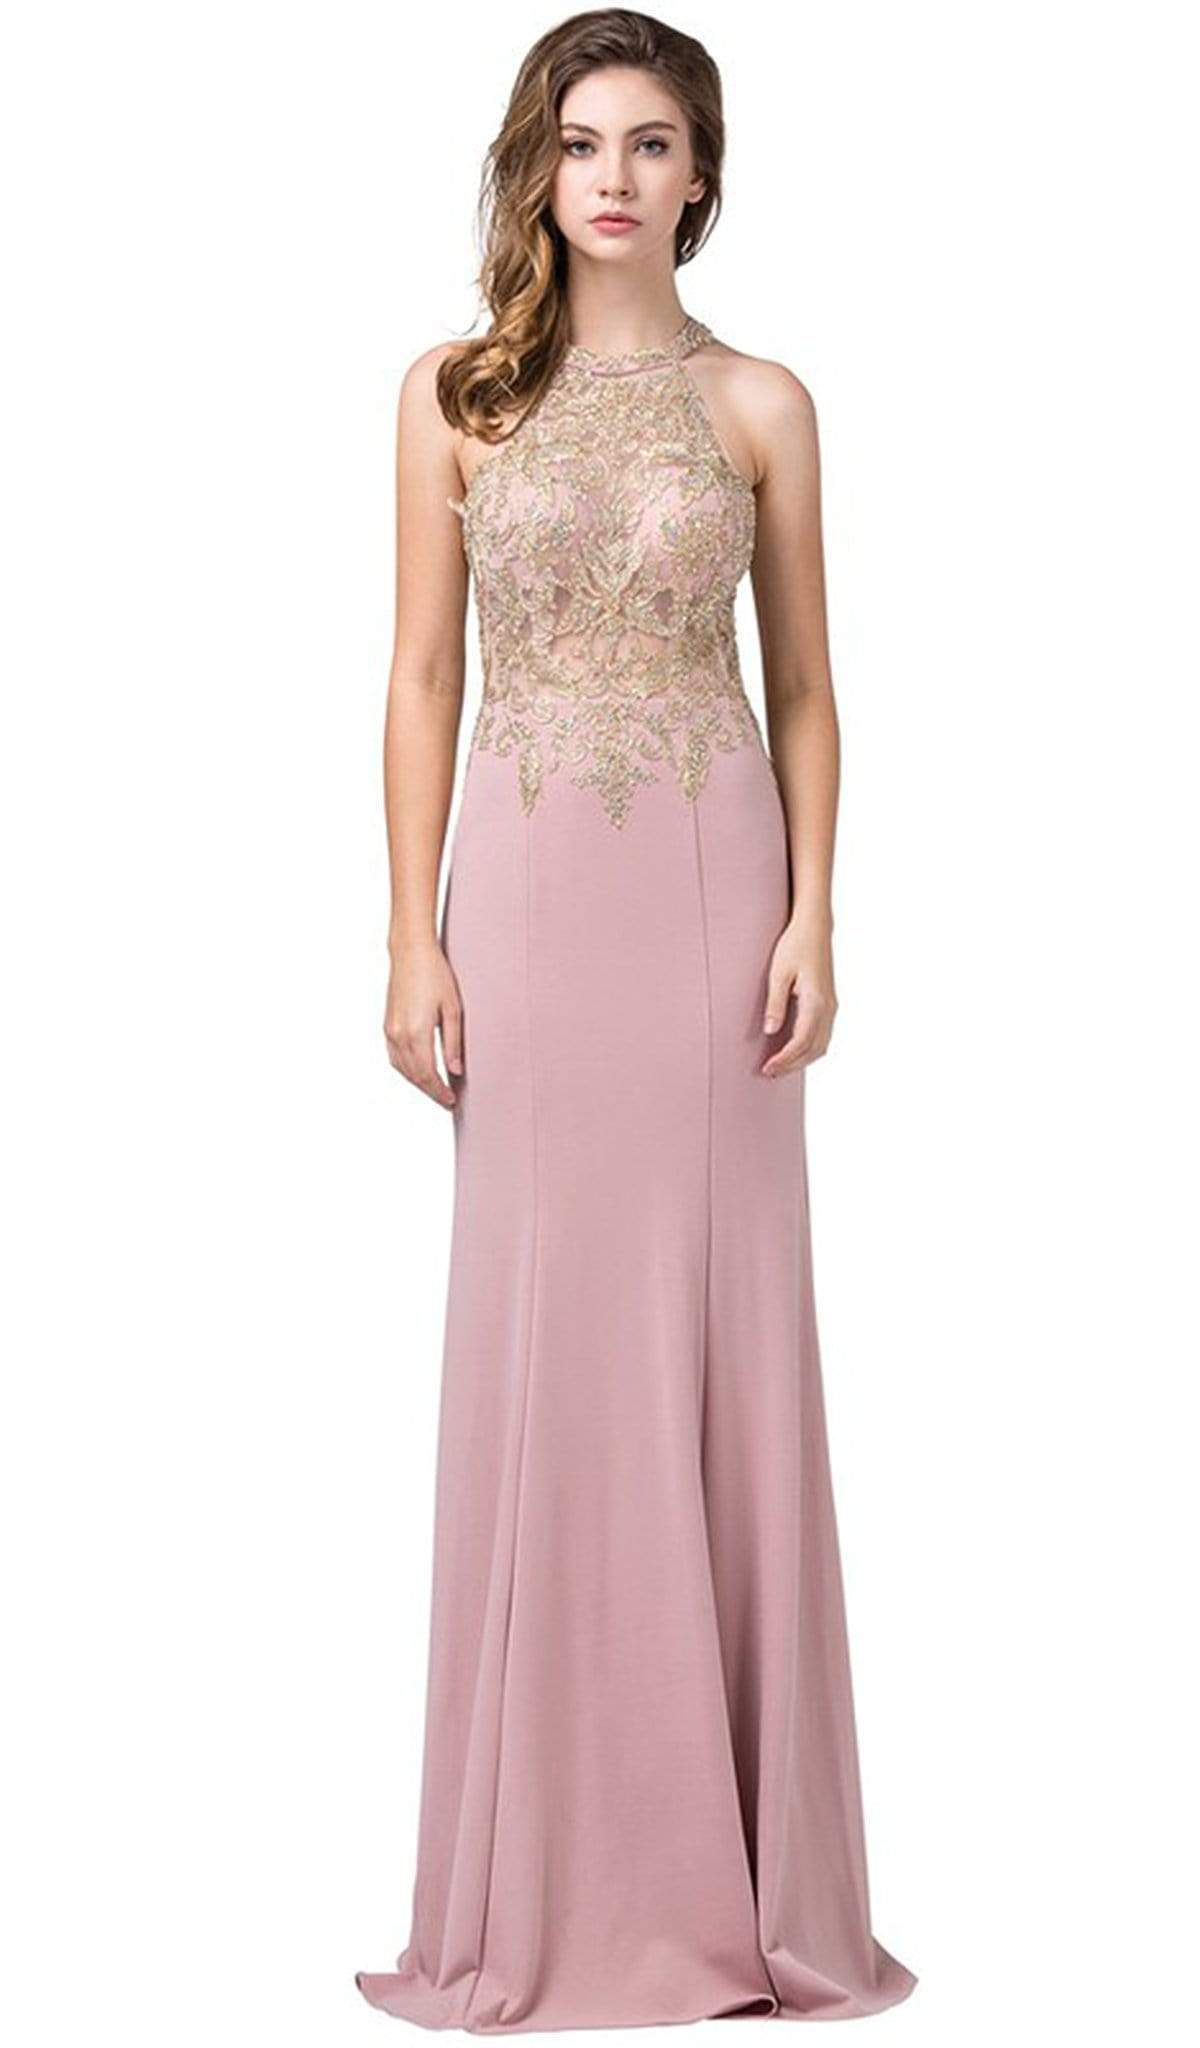 Dancing Queen - 2555 Embroidered Halter Long Trumpet Gown
